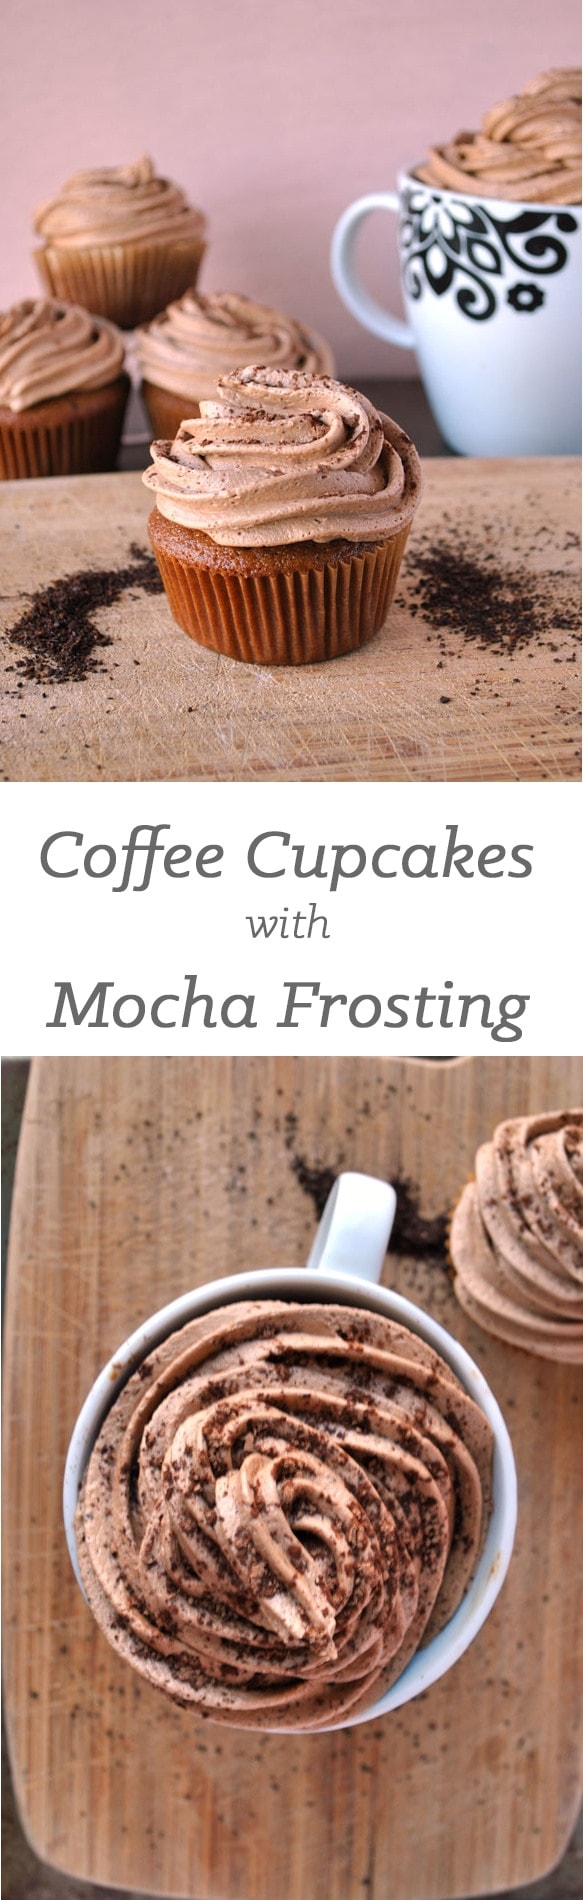 coffee-cupcakes-with-mocha-frosting